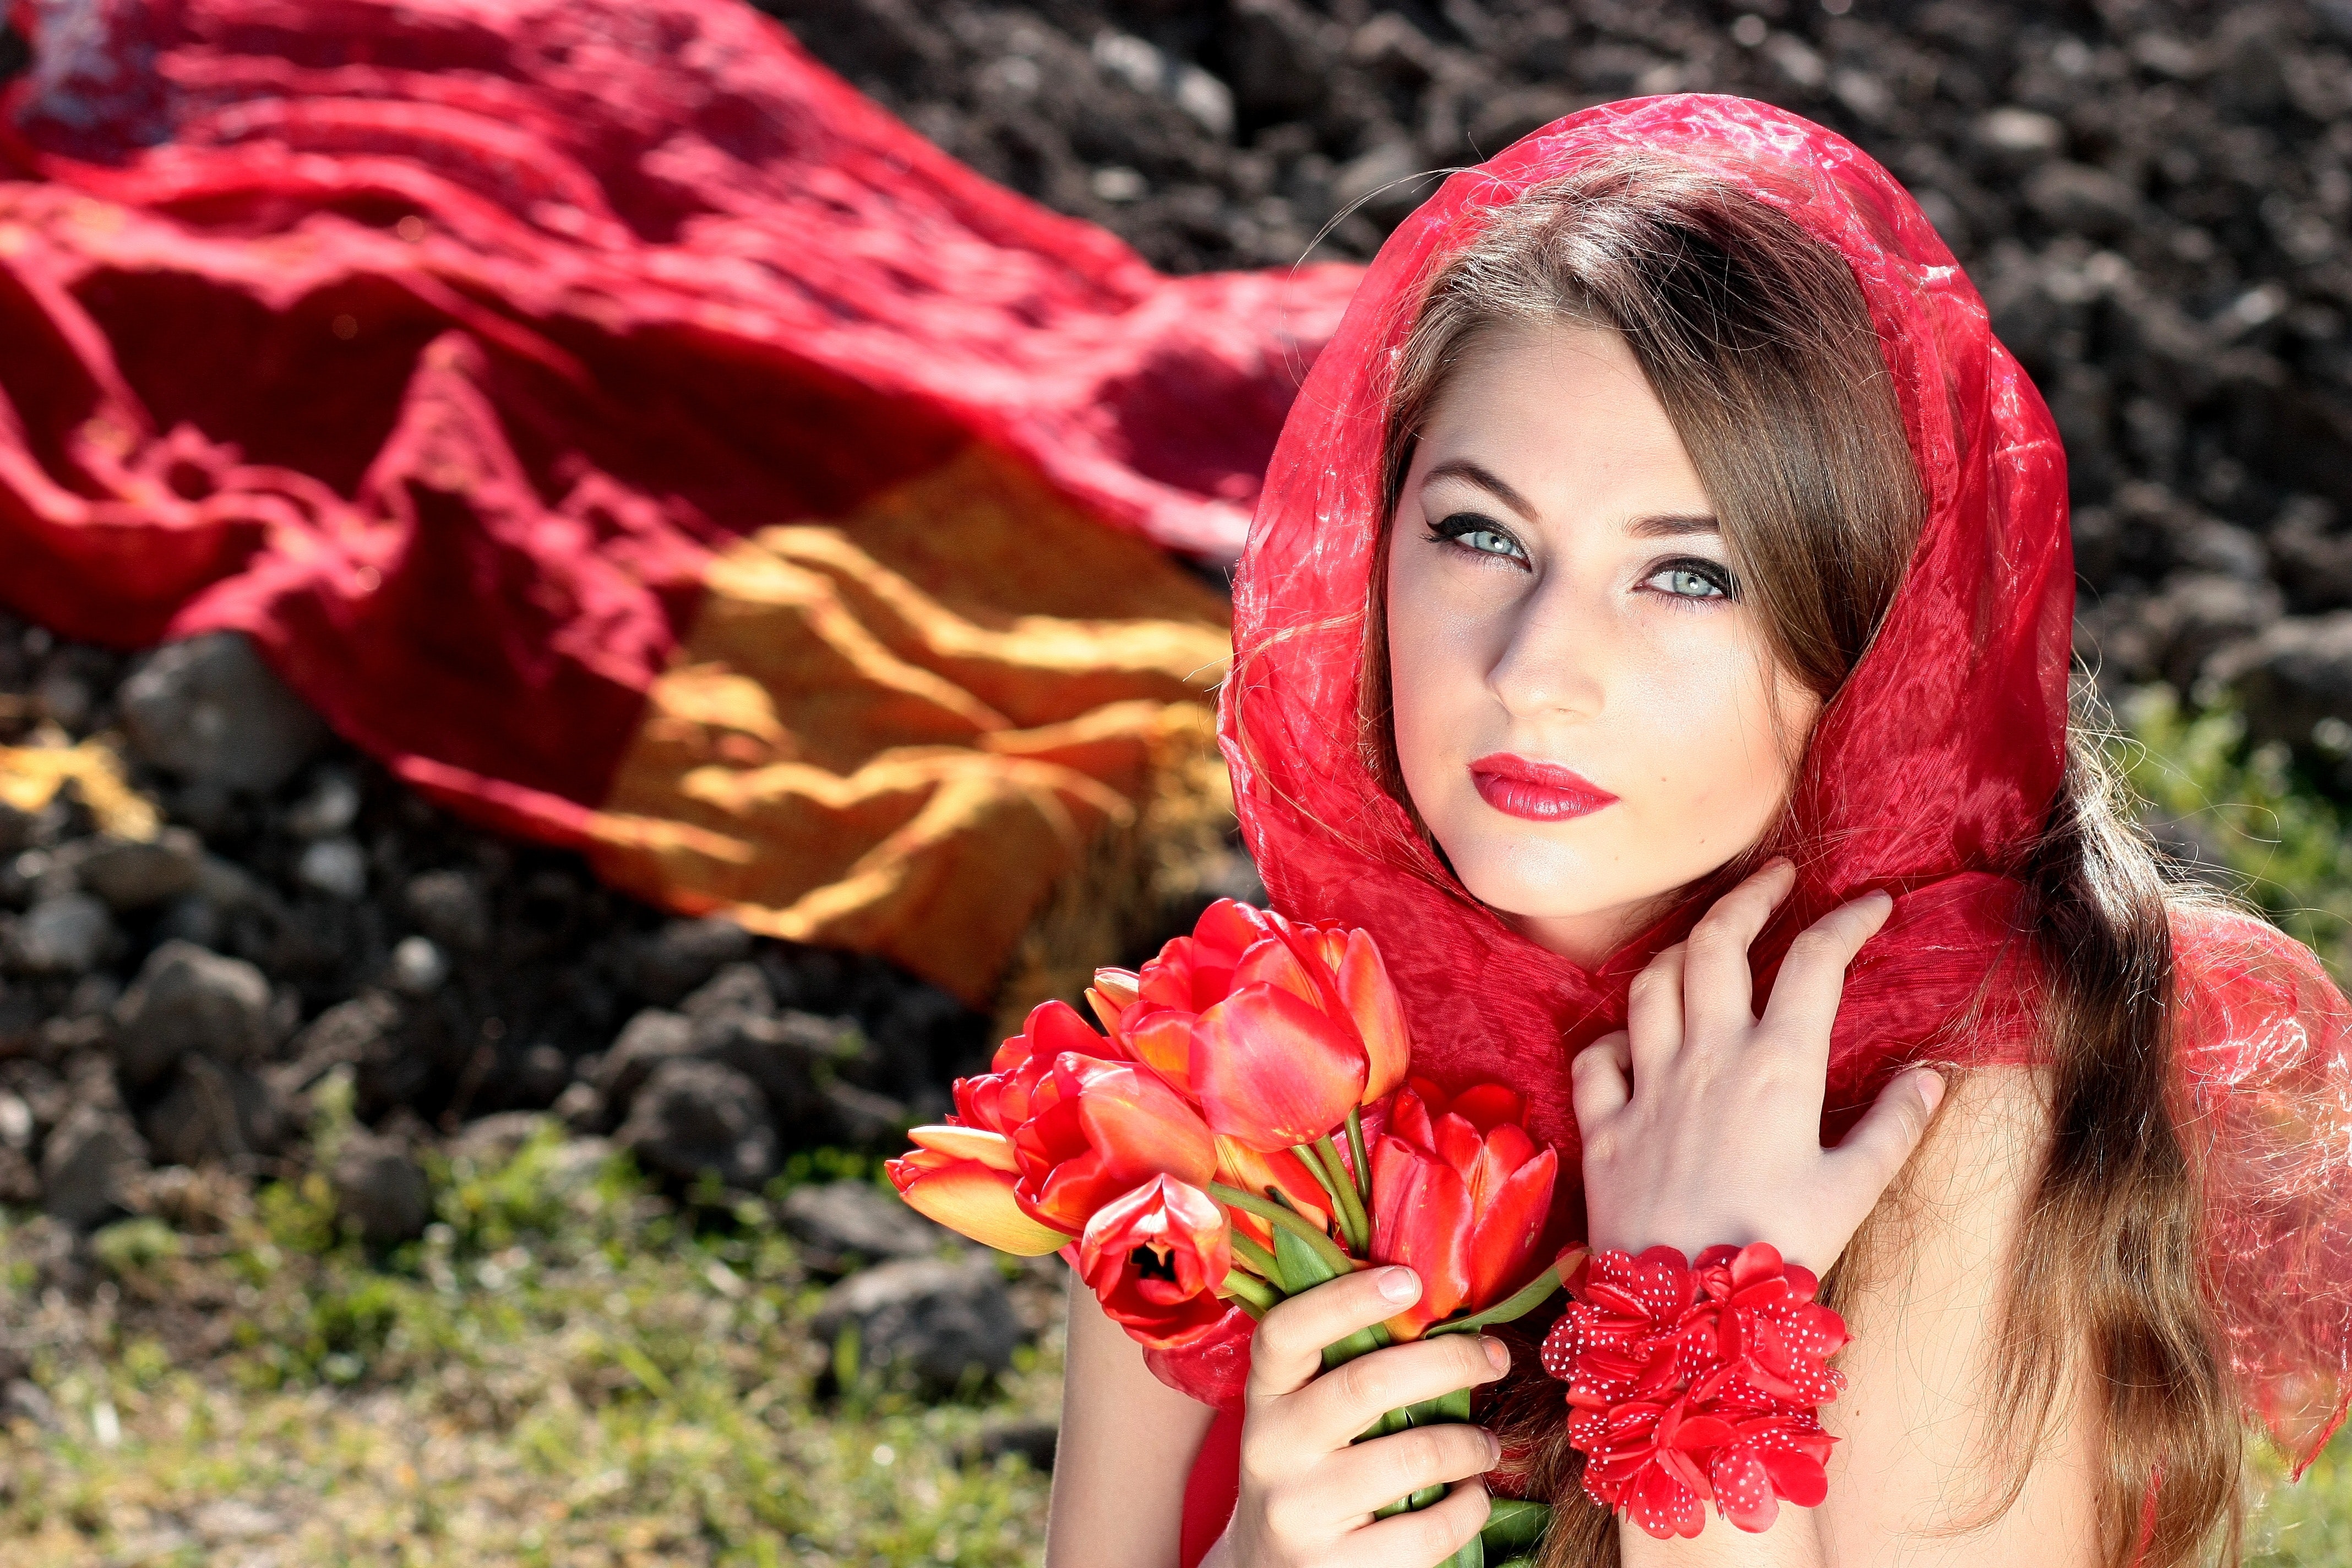 Free photo: Woman Wearing a Red Scarf Holding Red Flowers - Beautiful ...